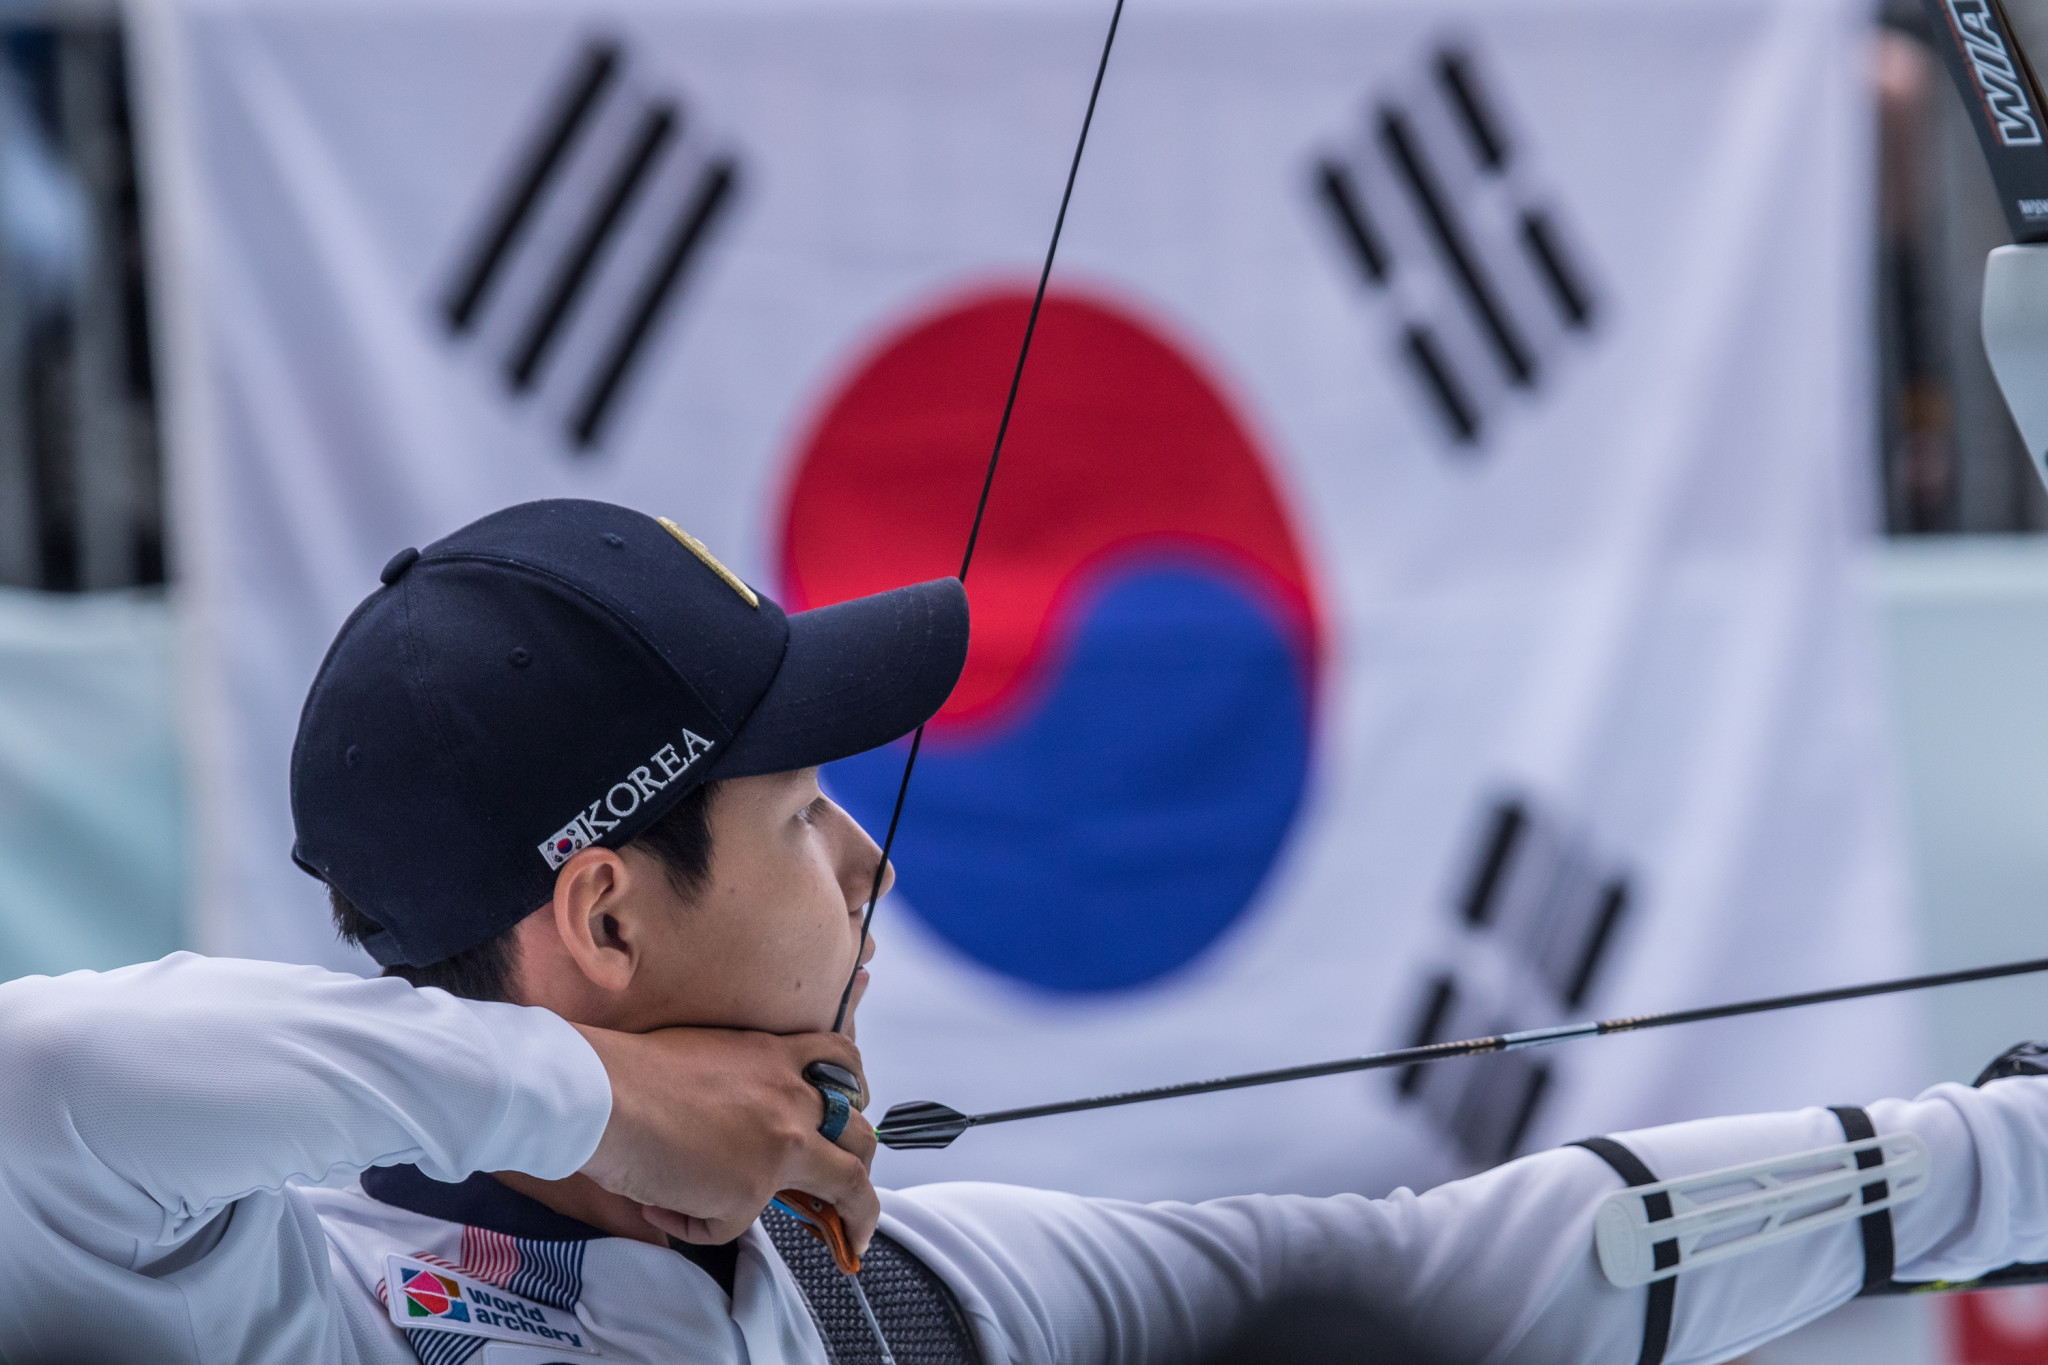 South Korea won nine of the 10 titles on offer at the Asian Archery Championships ©Getty Images